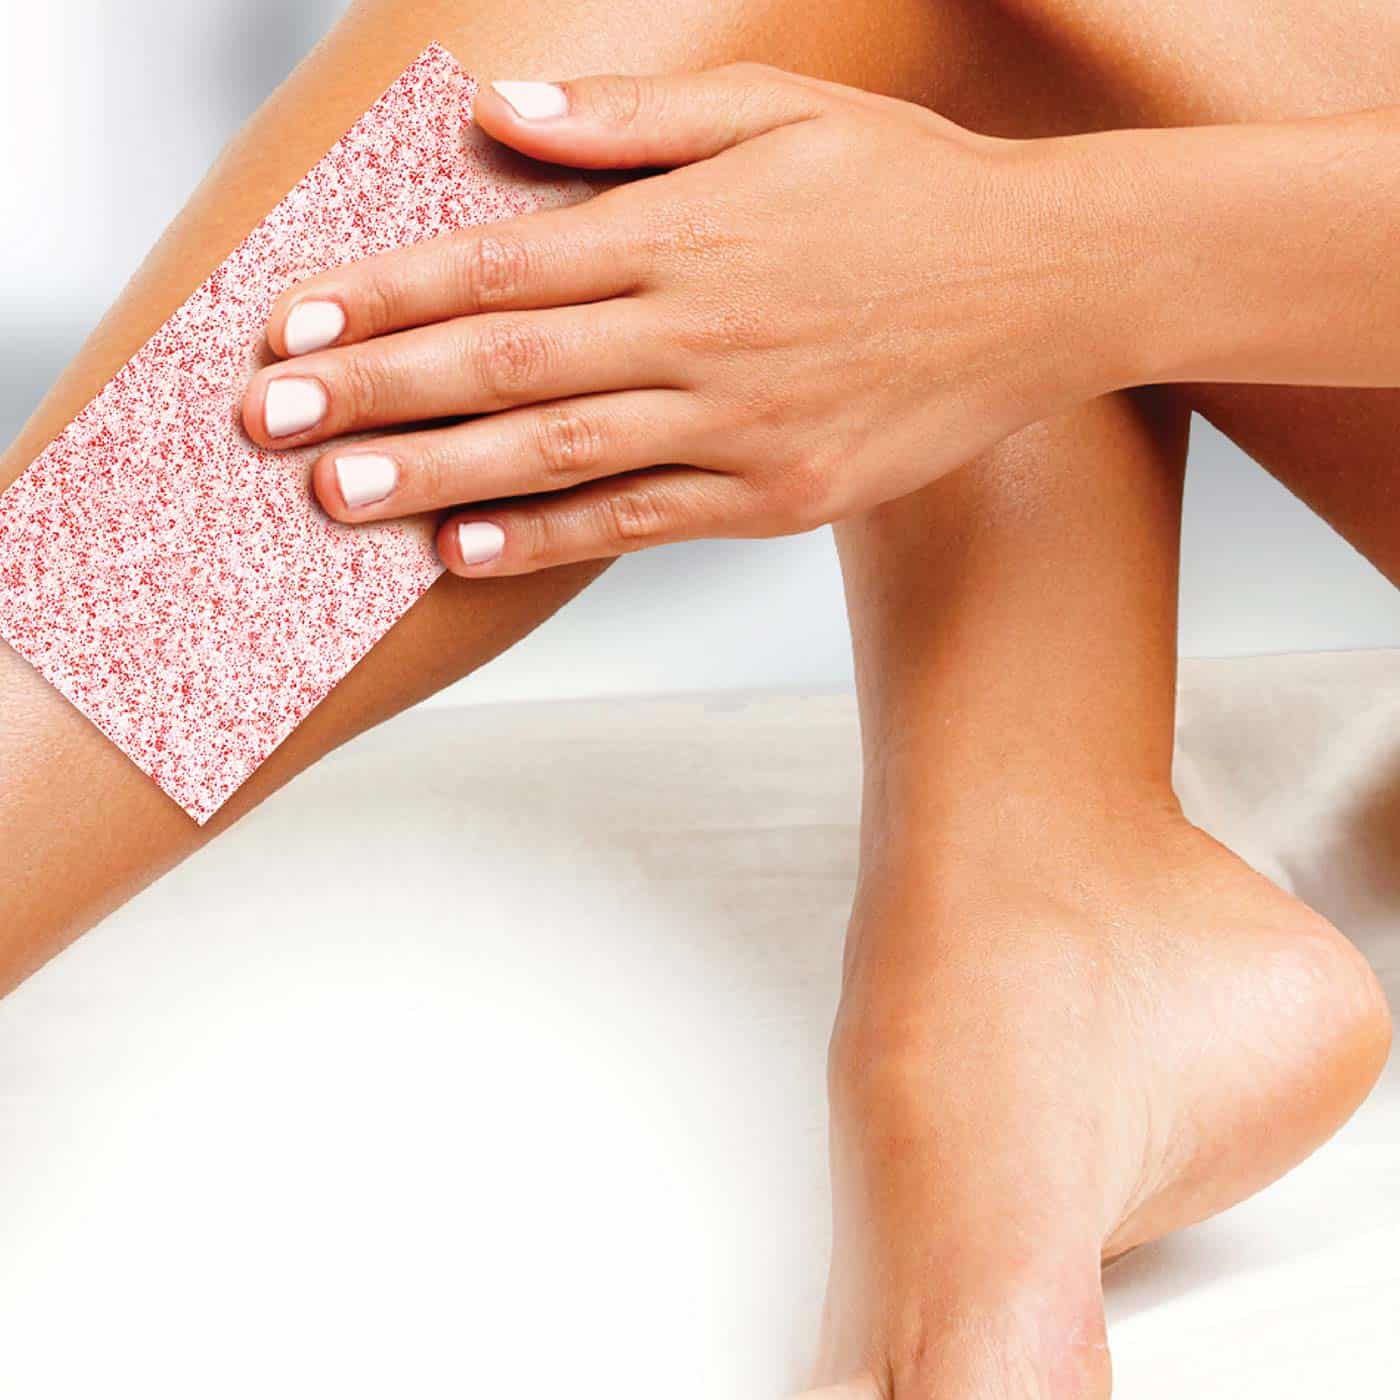 Introducing Nad’s Ultra Smoothing Exfoliating Wax Strips | Nad's Hair Removal Blog